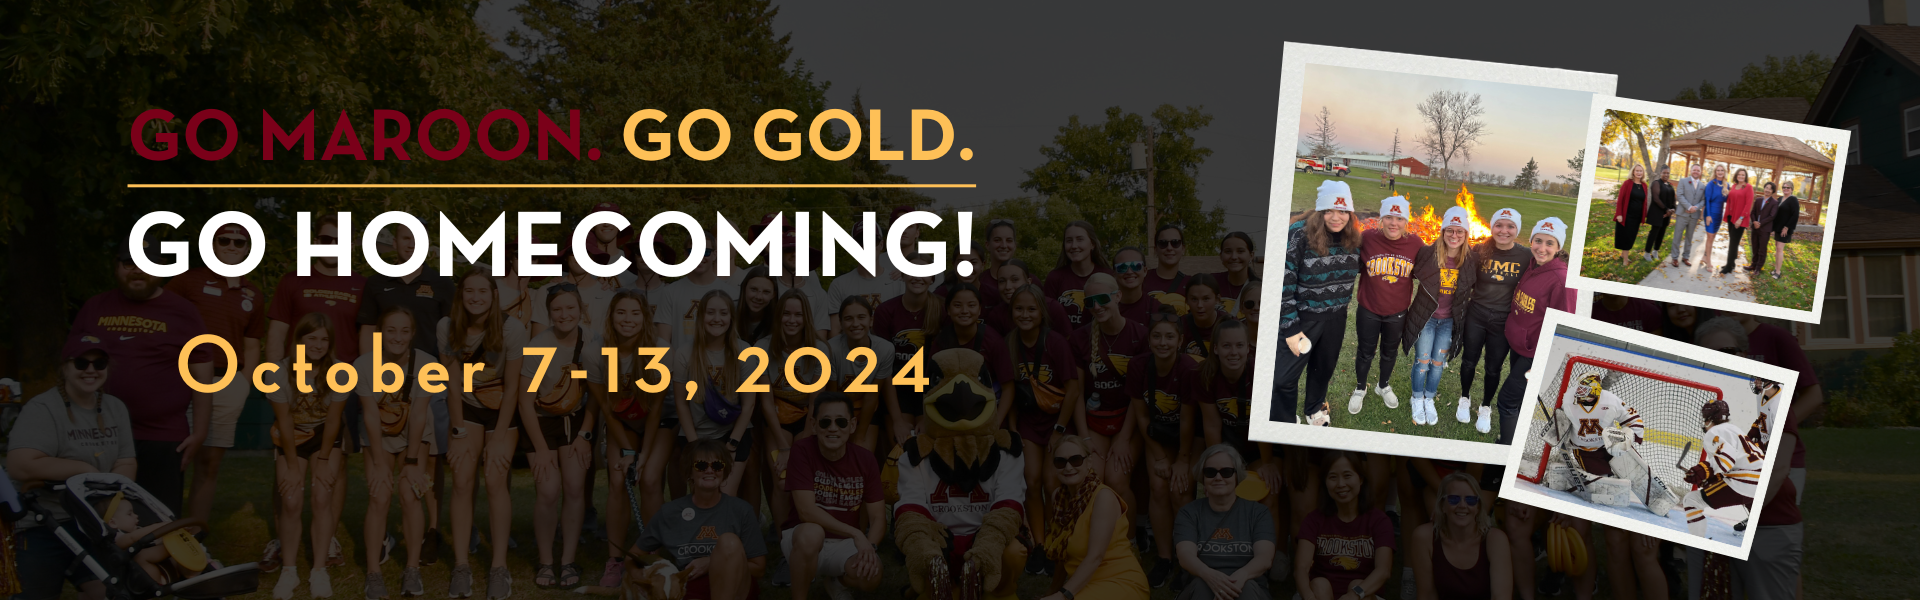 Homecoming 2024 banner image - October 7-13, 2024